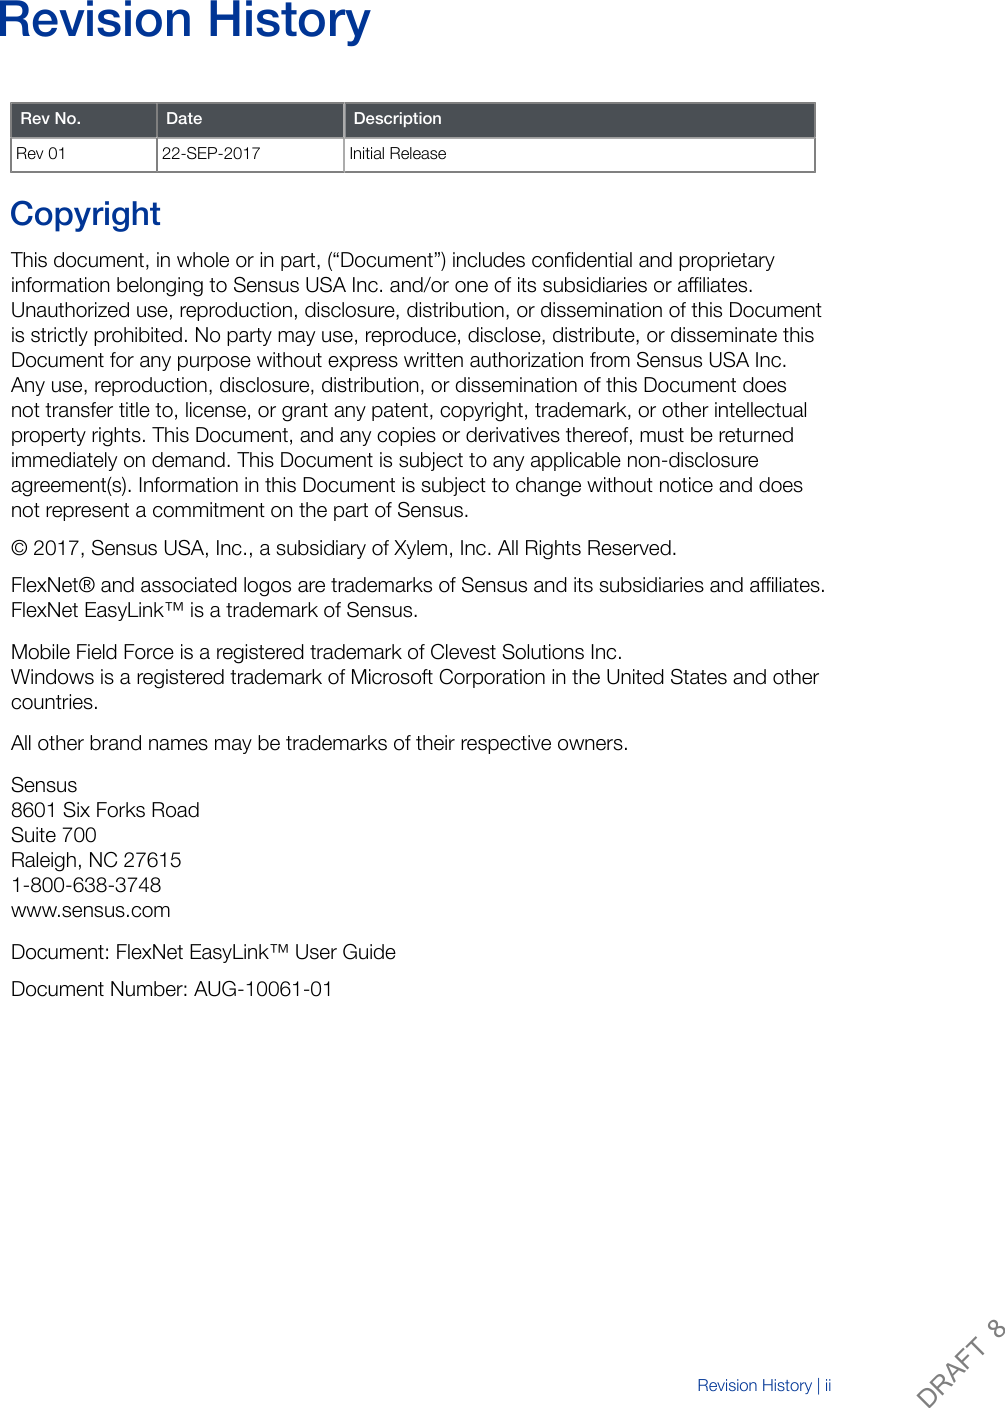 Revision HistoryRev No. Date DescriptionRev 01 22-SEP-2017 Initial Release CopyrightThis document, in whole or in part, (“Document”) includes confidential and proprietaryinformation belonging to Sensus USA Inc. and/or one of its subsidiaries or affiliates.Unauthorized use, reproduction, disclosure, distribution, or dissemination of this Documentis strictly prohibited. No party may use, reproduce, disclose, distribute, or disseminate thisDocument for any purpose without express written authorization from Sensus USA Inc.Any use, reproduction, disclosure, distribution, or dissemination of this Document doesnot transfer title to, license, or grant any patent, copyright, trademark, or other intellectualproperty rights. This Document, and any copies or derivatives thereof, must be returnedimmediately on demand. This Document is subject to any applicable non-disclosureagreement(s). Information in this Document is subject to change without notice and doesnot represent a commitment on the part of Sensus.© 2017, Sensus USA, Inc., a subsidiary of Xylem, Inc. All Rights Reserved.FlexNet® and associated logos are trademarks of Sensus and its subsidiaries and affiliates.FlexNet EasyLink™ is a trademark of Sensus.Mobile Field Force is a registered trademark of Clevest Solutions Inc.Windows is a registered trademark of Microsoft Corporation in the United States and othercountries.All other brand names may be trademarks of their respective owners.Sensus8601 Six Forks RoadSuite 700Raleigh, NC 276151-800-638-3748www.sensus.comDocument: FlexNet EasyLink™ User GuideDocument Number: AUG-10061-01Revision History | iiDRAFT 8